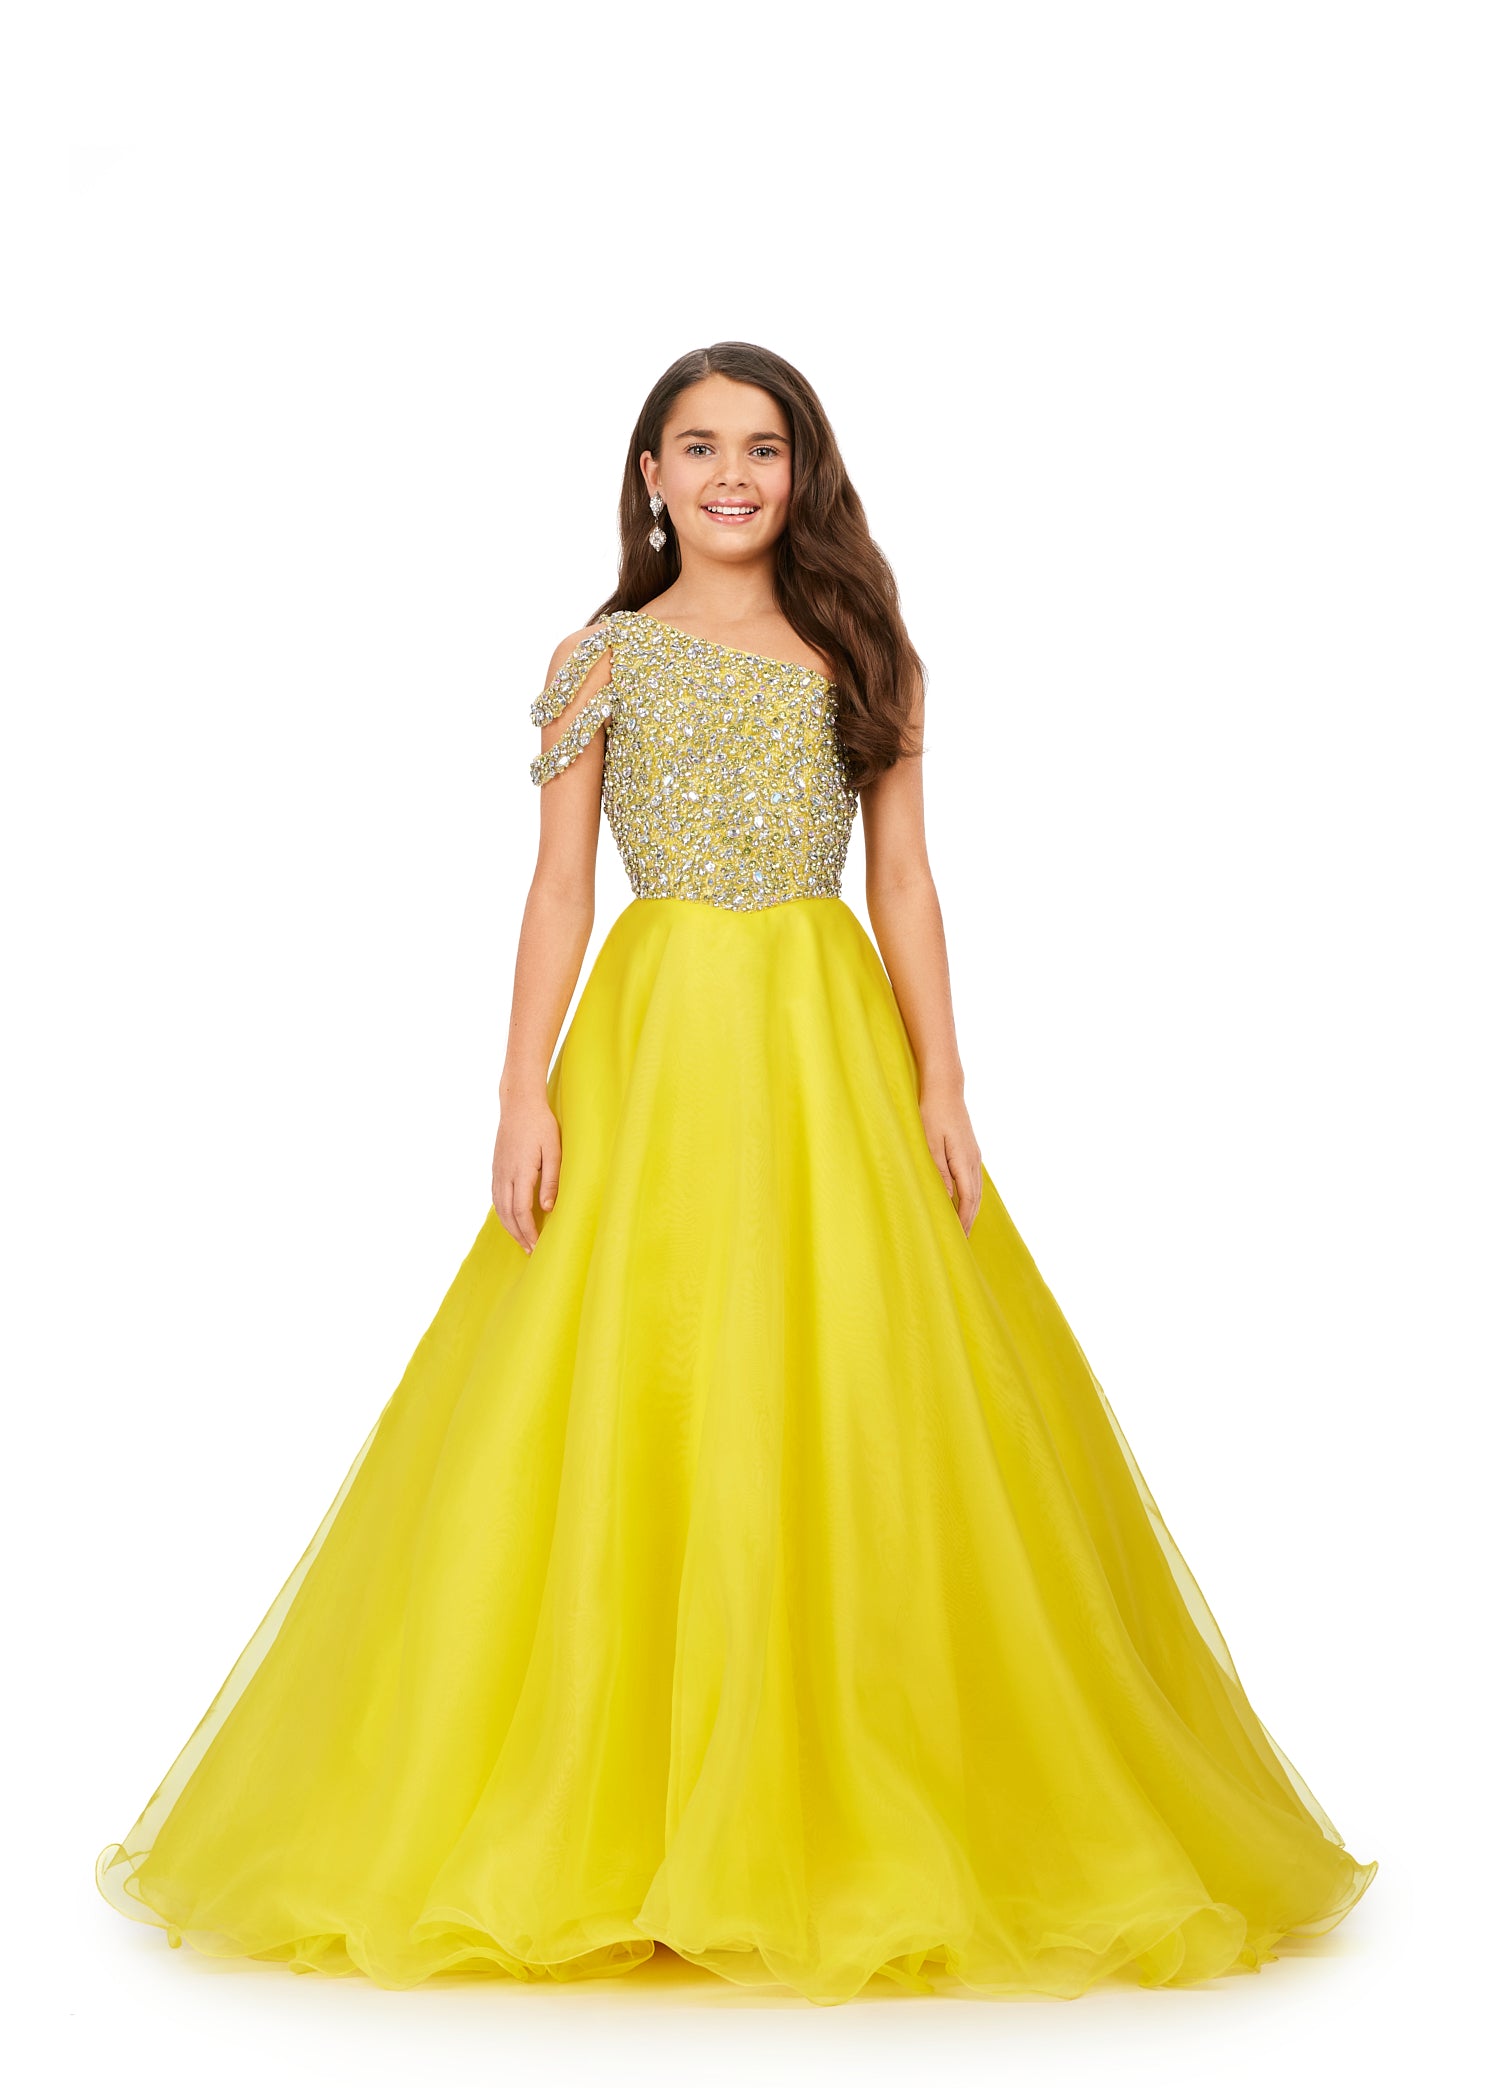 Ensure your little one sparkles on stage in this Ashley Lauren Kids 8182 girls' pageant ballgown. Its one shoulder design features a fully encrusted crystal bodice and shoulder straps, with an a-line organza wire hem skirt for added elegance and movement. Make it a night to remember with this standout dress.  Sizes: 4-16  Colors: Yellow, Aqua, Red